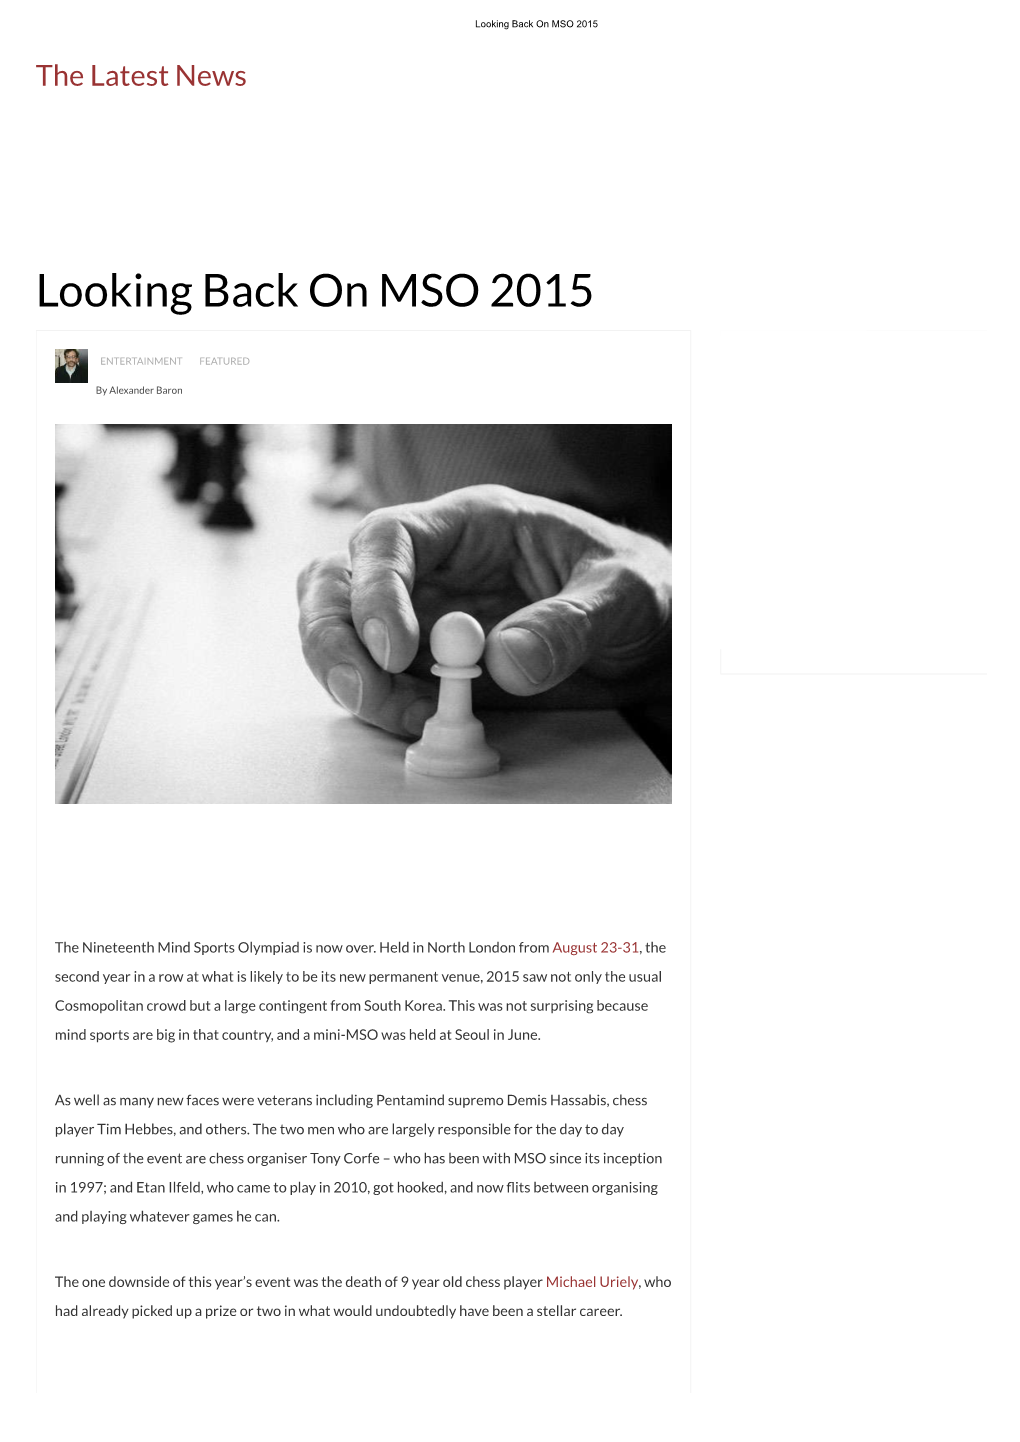 Looking Back on MSO 2015